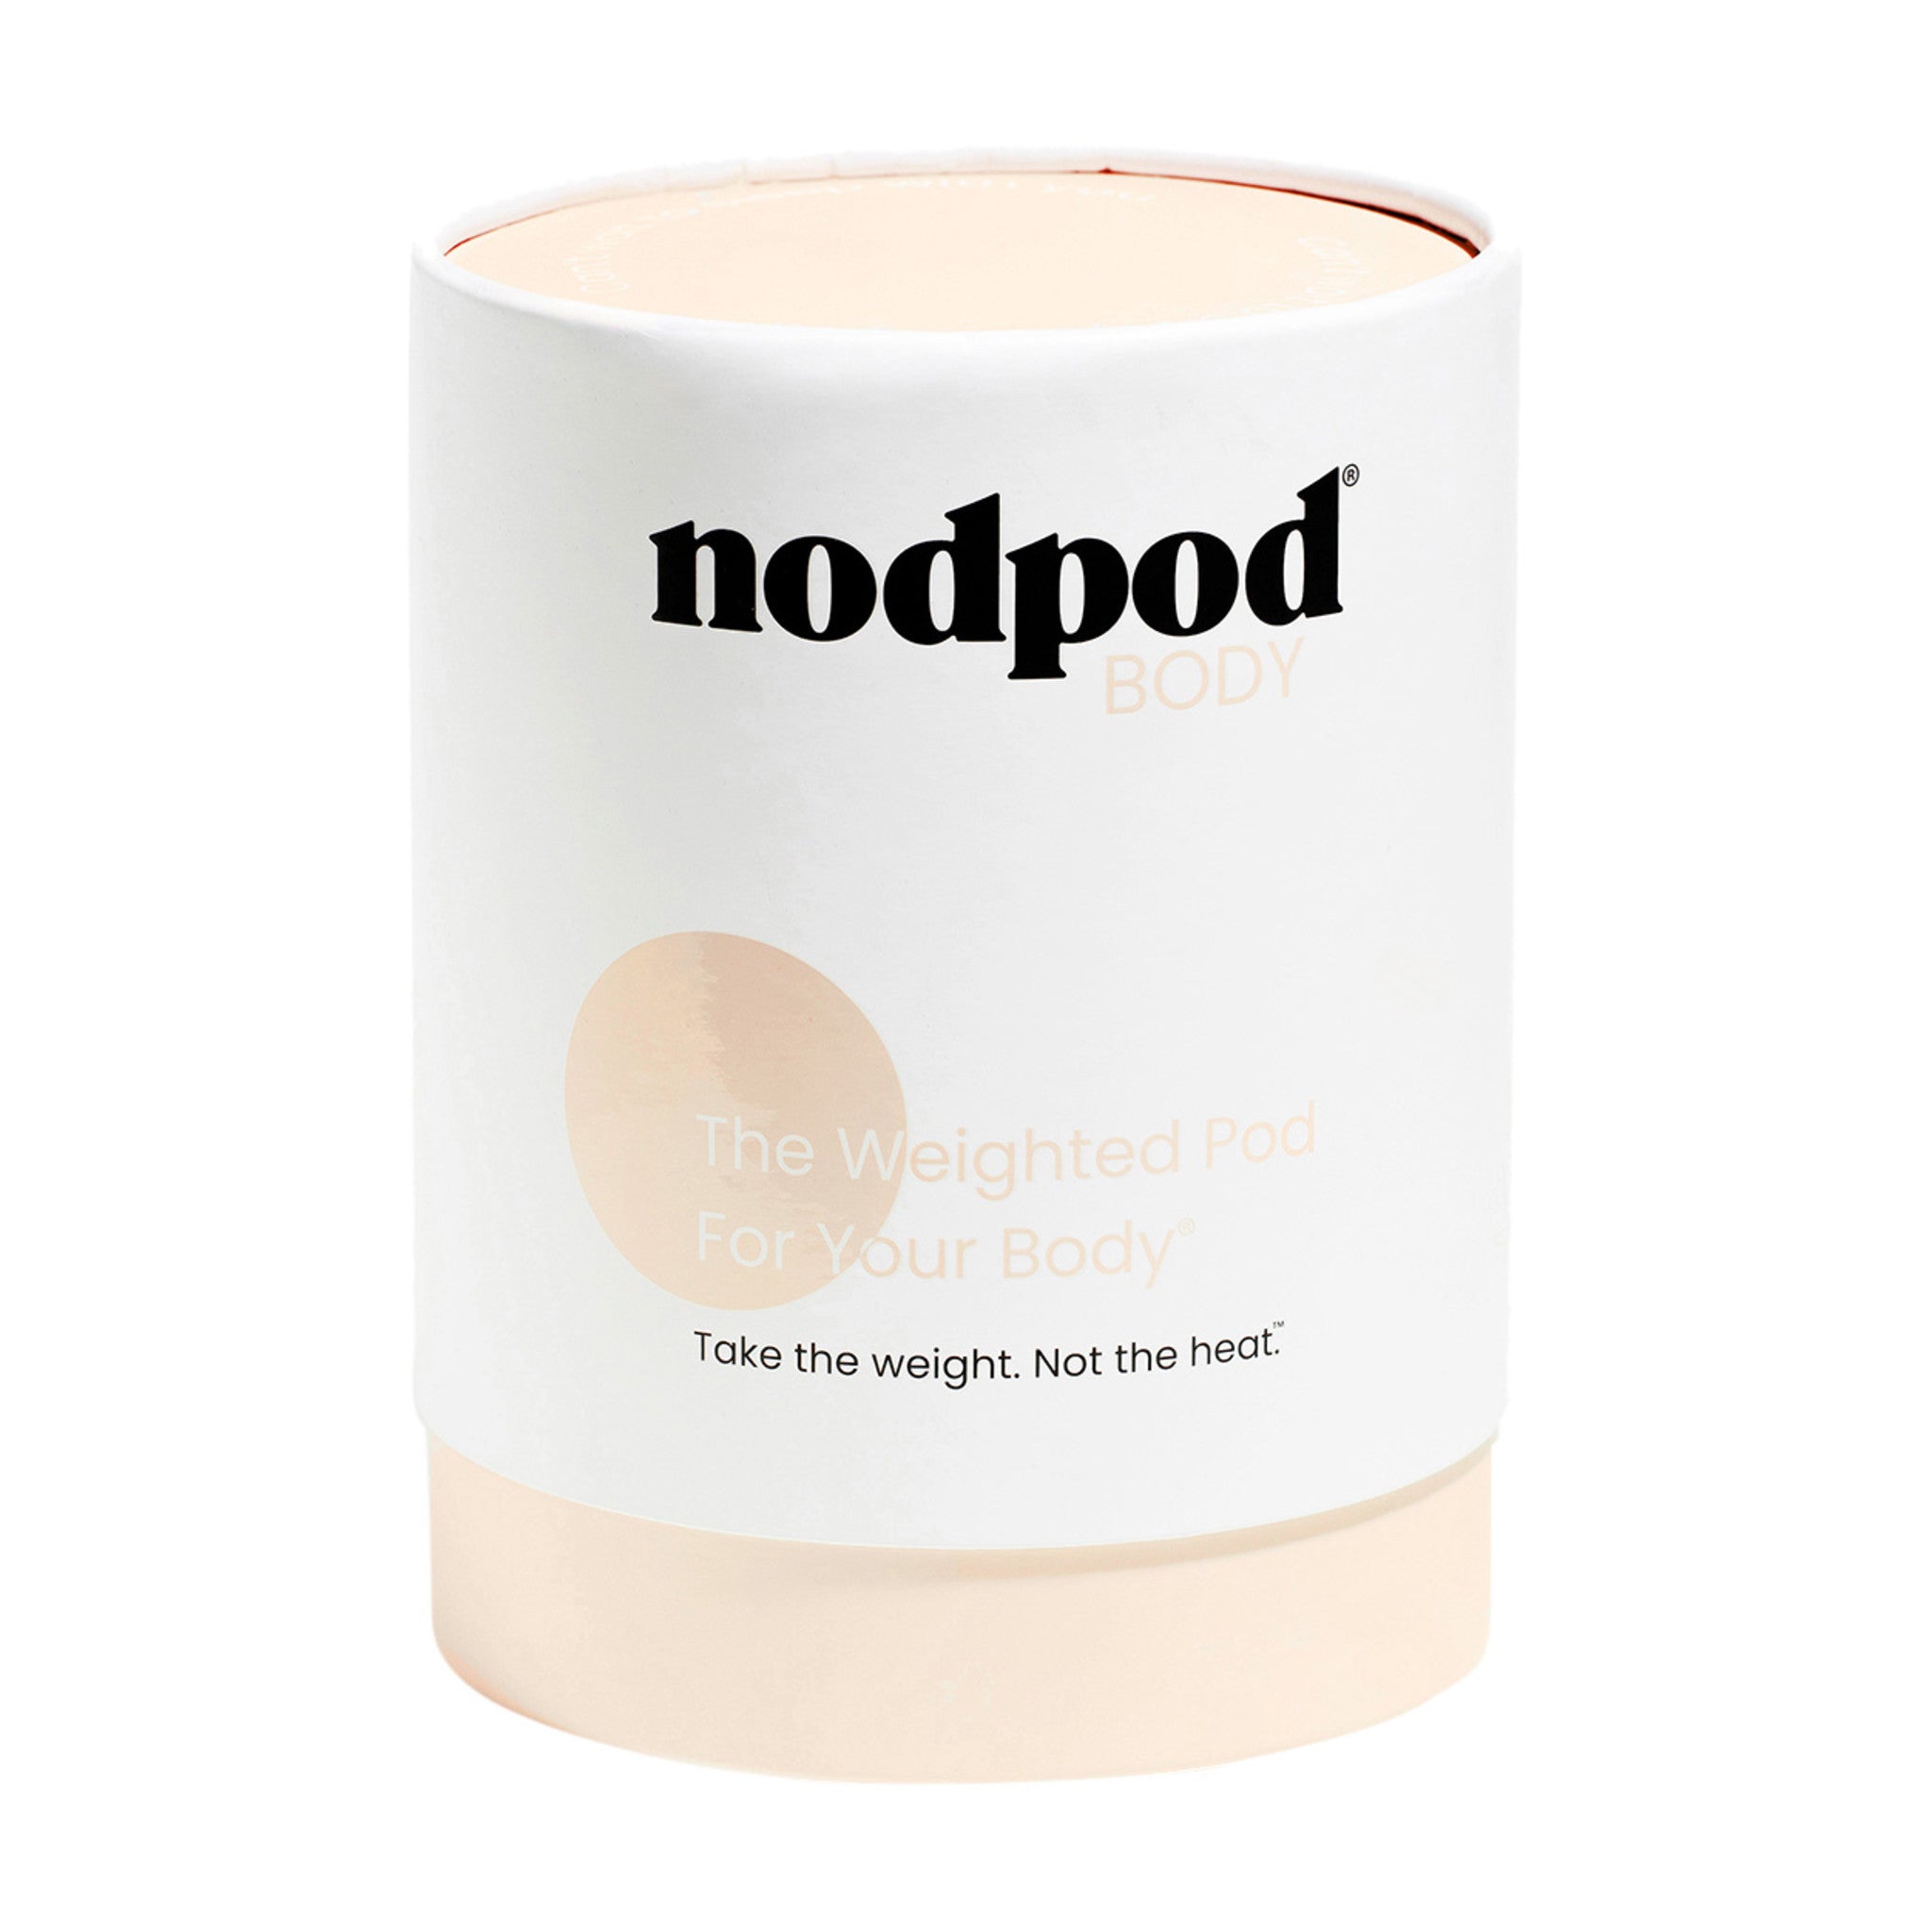 Nodpod The Weighted Pod for Your Body Color/Shade variant: Bone main image.